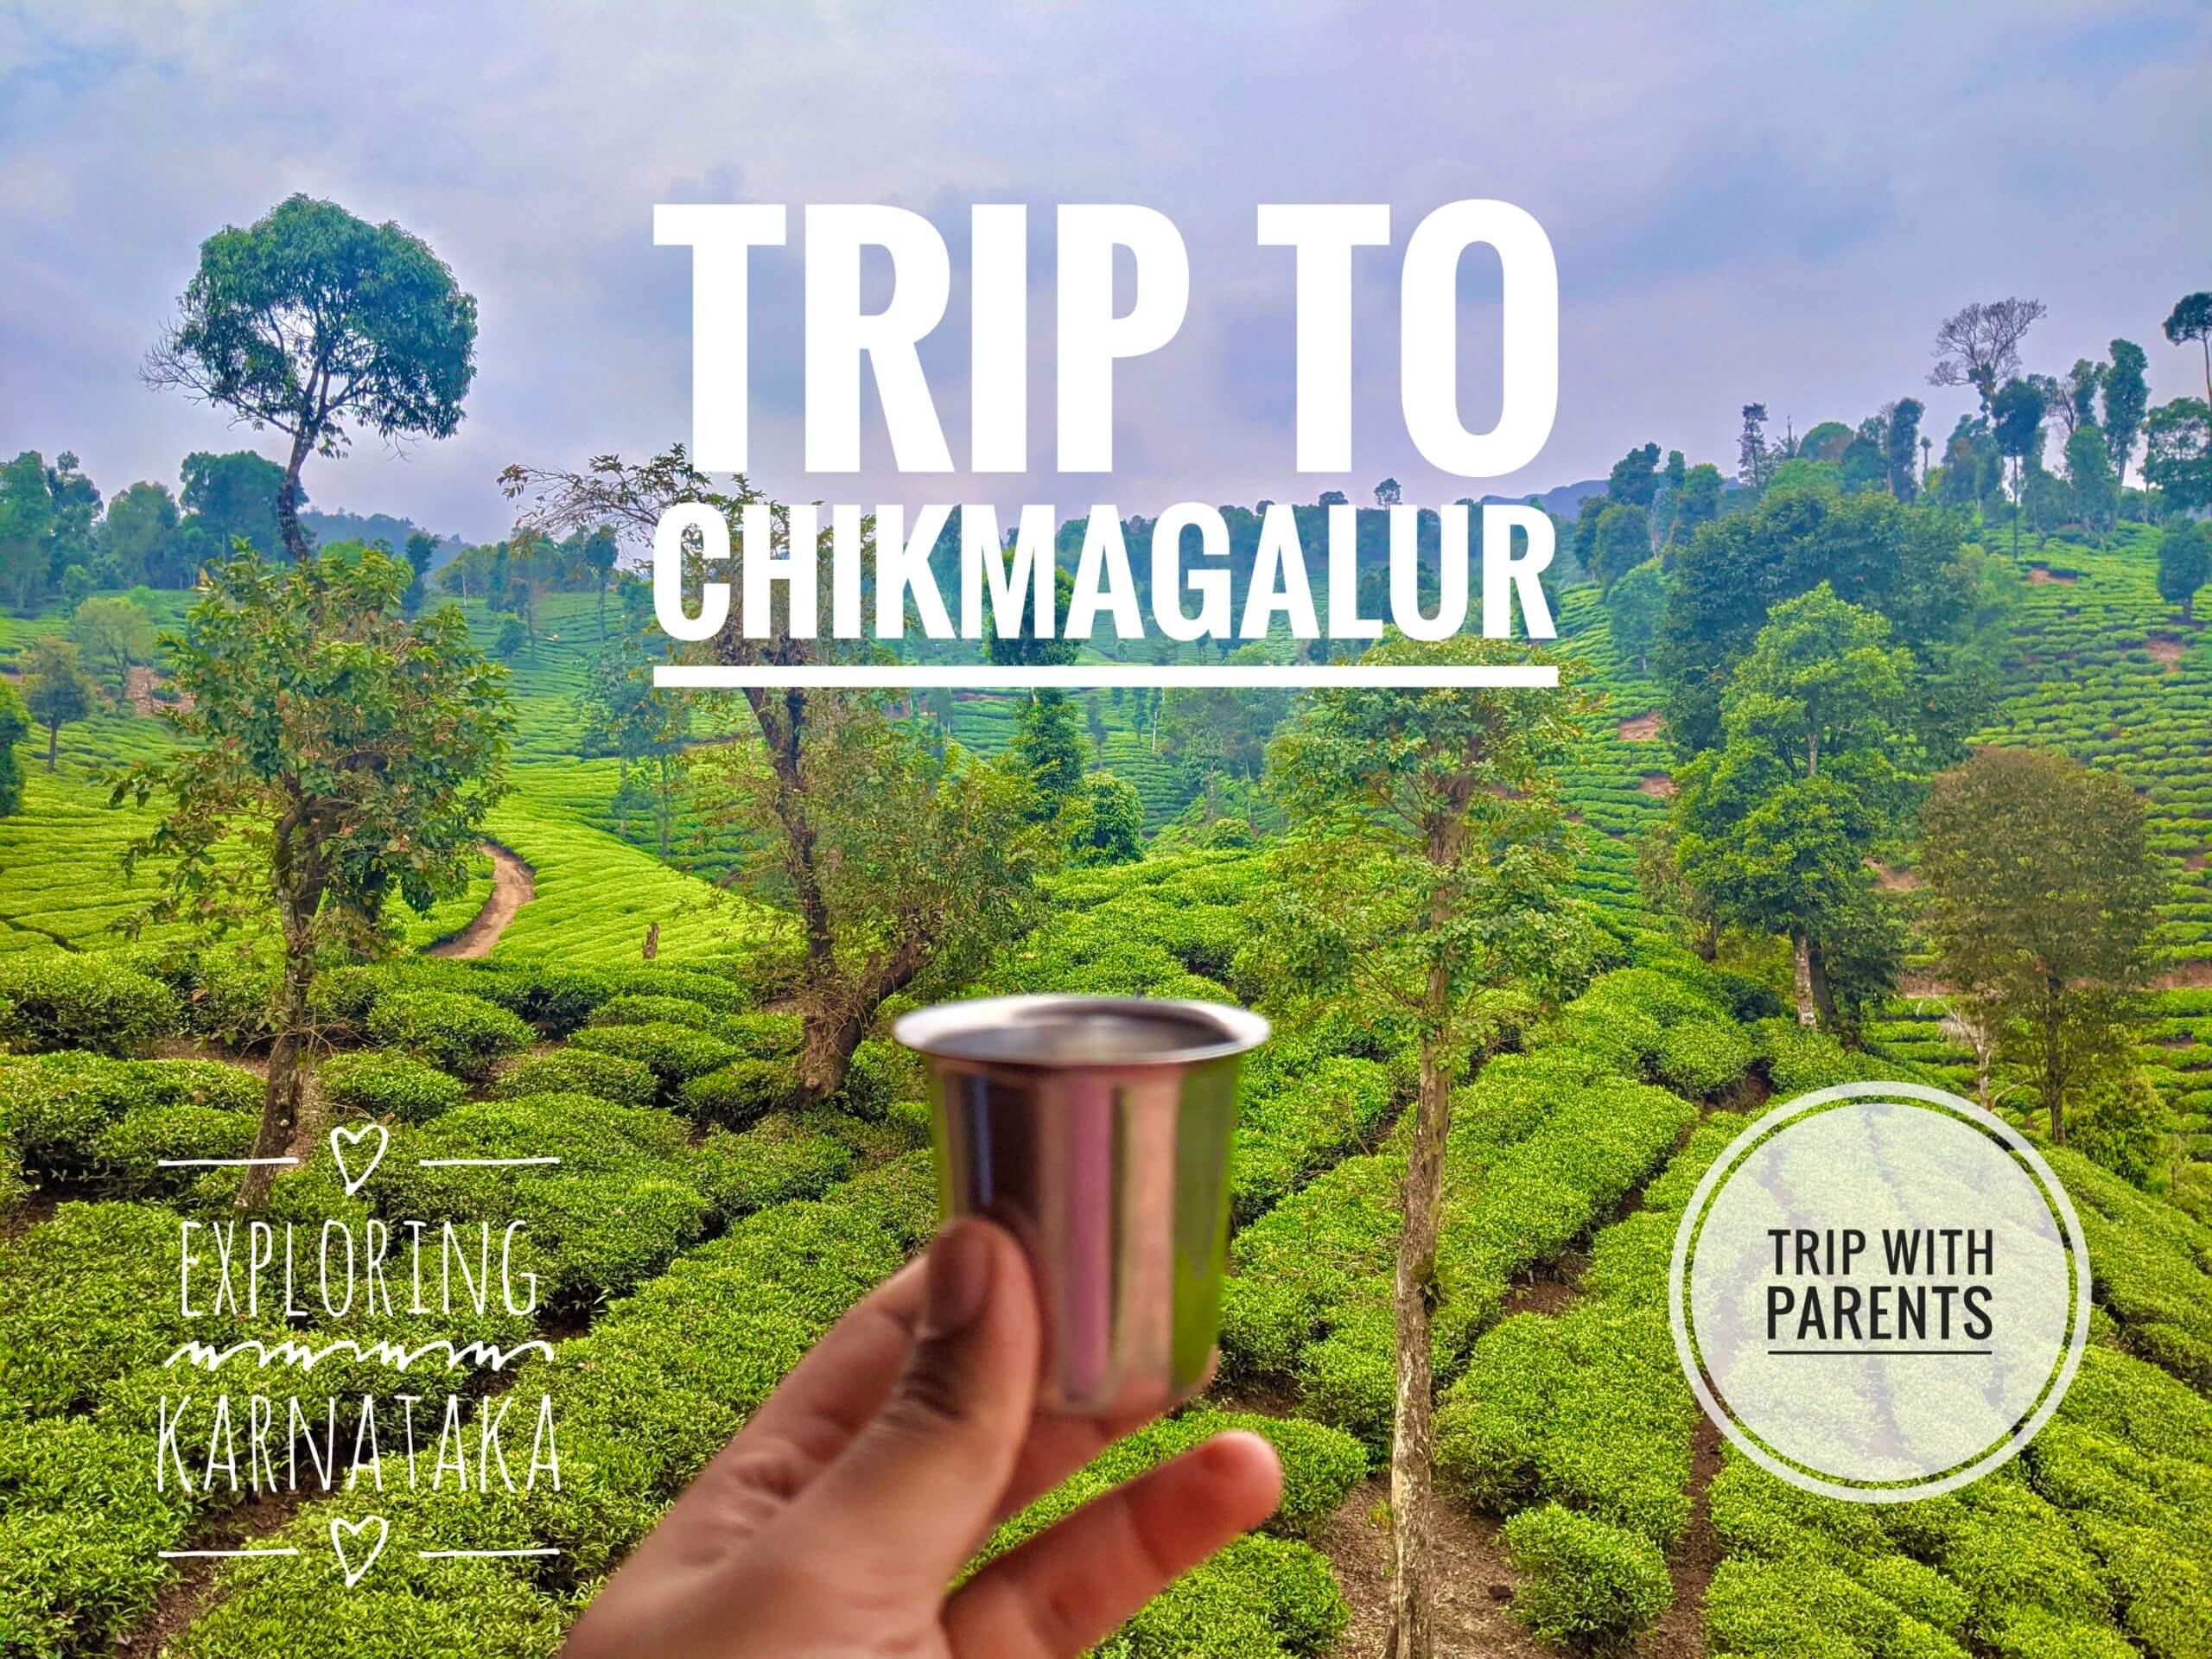 chikmagalur trip cost